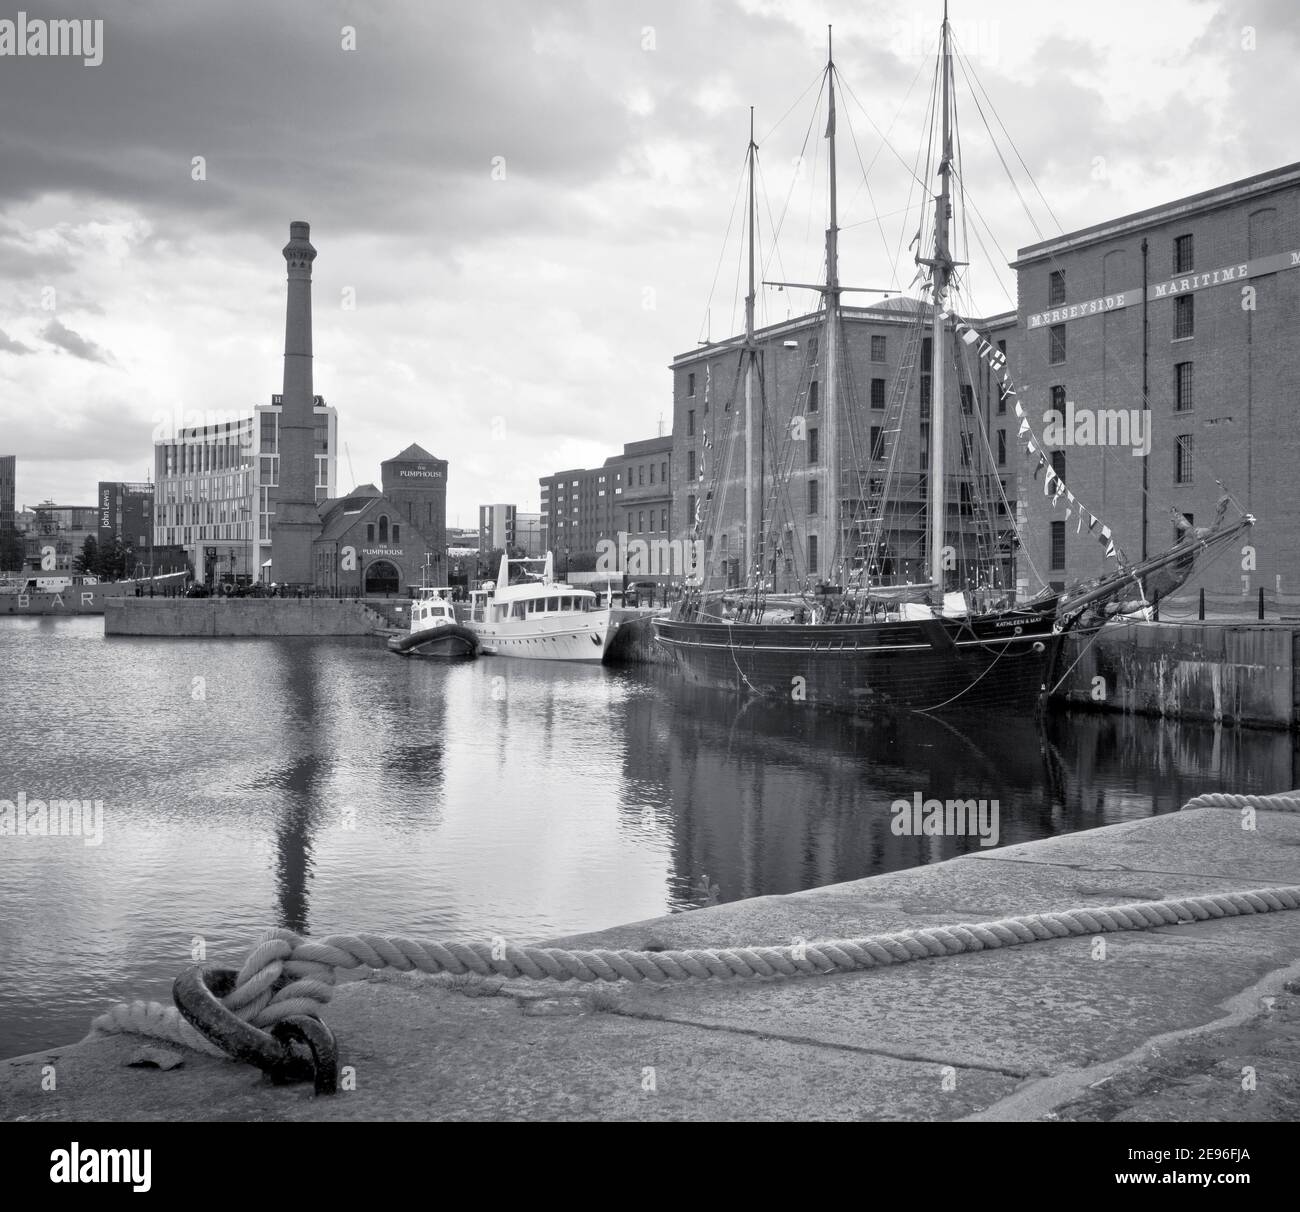 Old ships and boats at Albert Dock in Liverpool, along the River Mersey, Maritime Museum, Museum of Slavery, knowledge, tourist, tourism Stock Photo